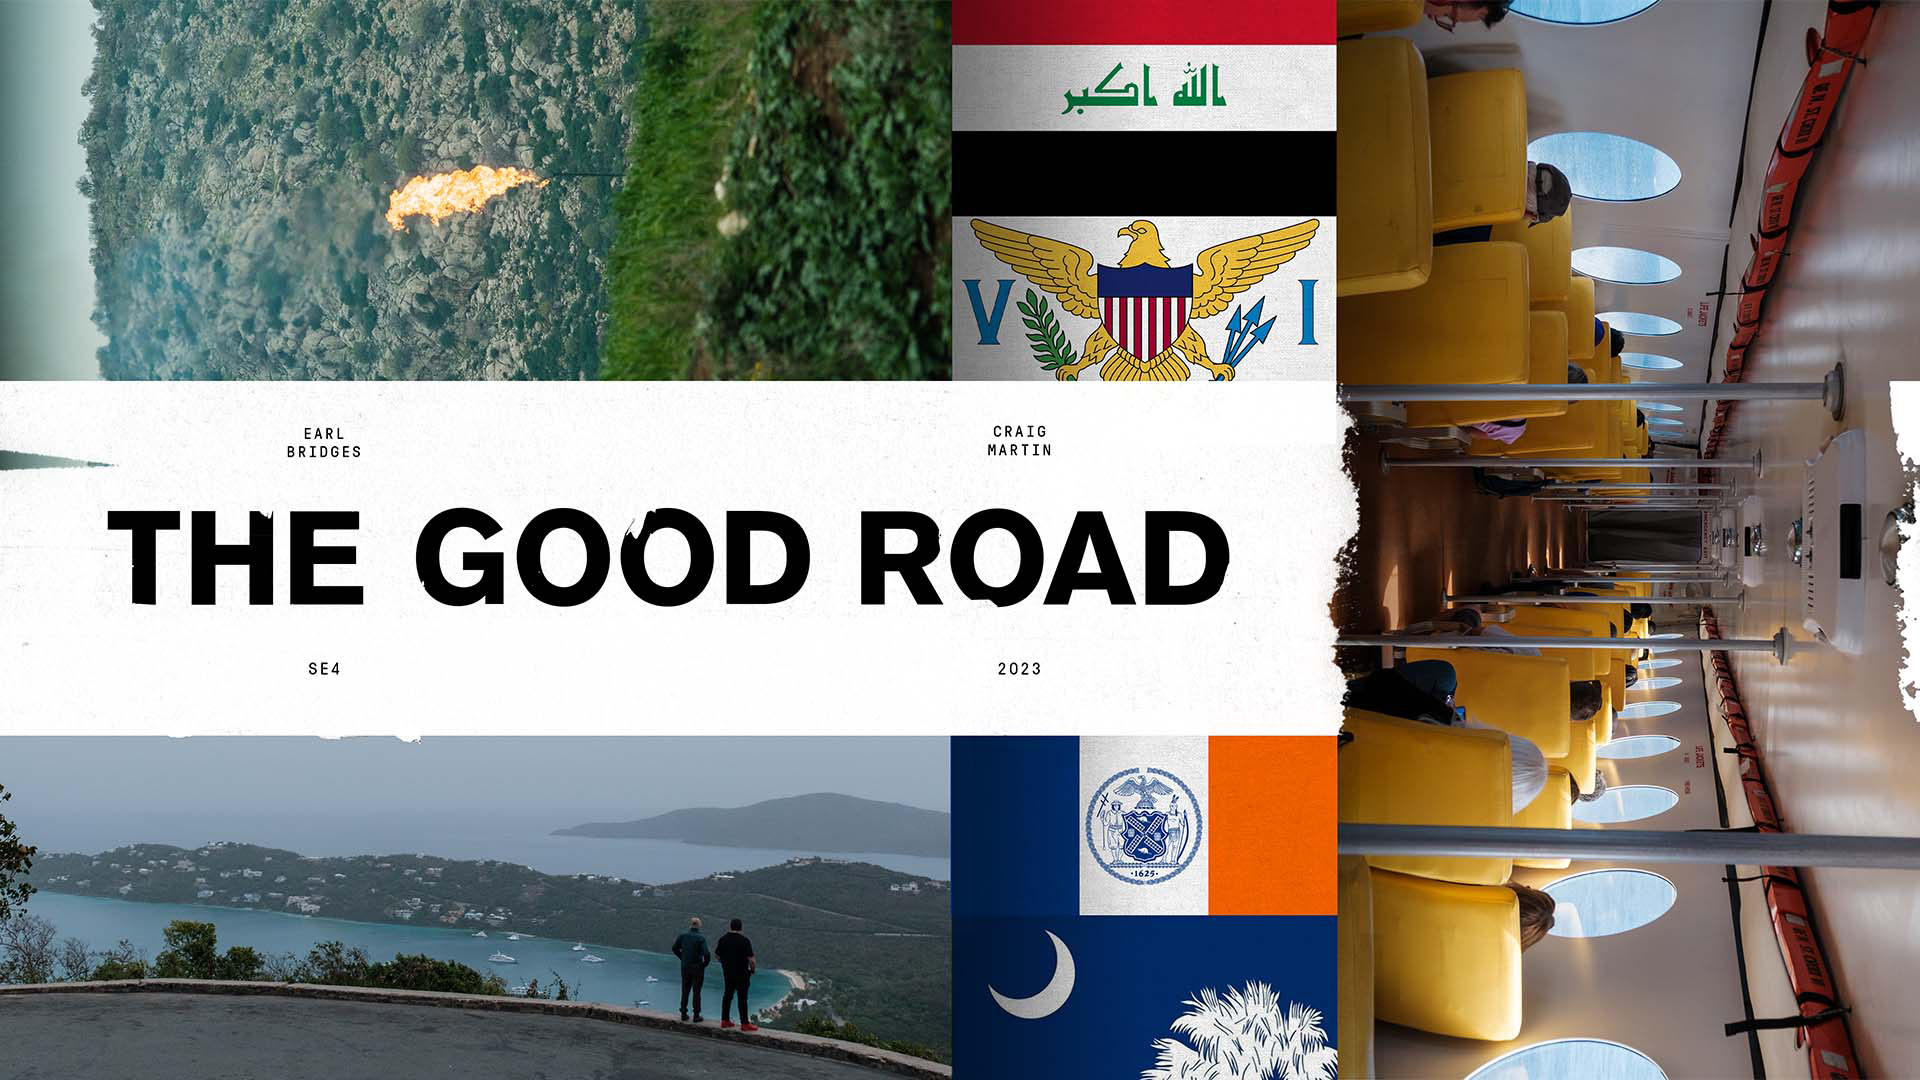 Check your local listings for The Good Road Season 4 airing on a station near you! Download a zipped file of promotional materials in the Additional Assets section below.